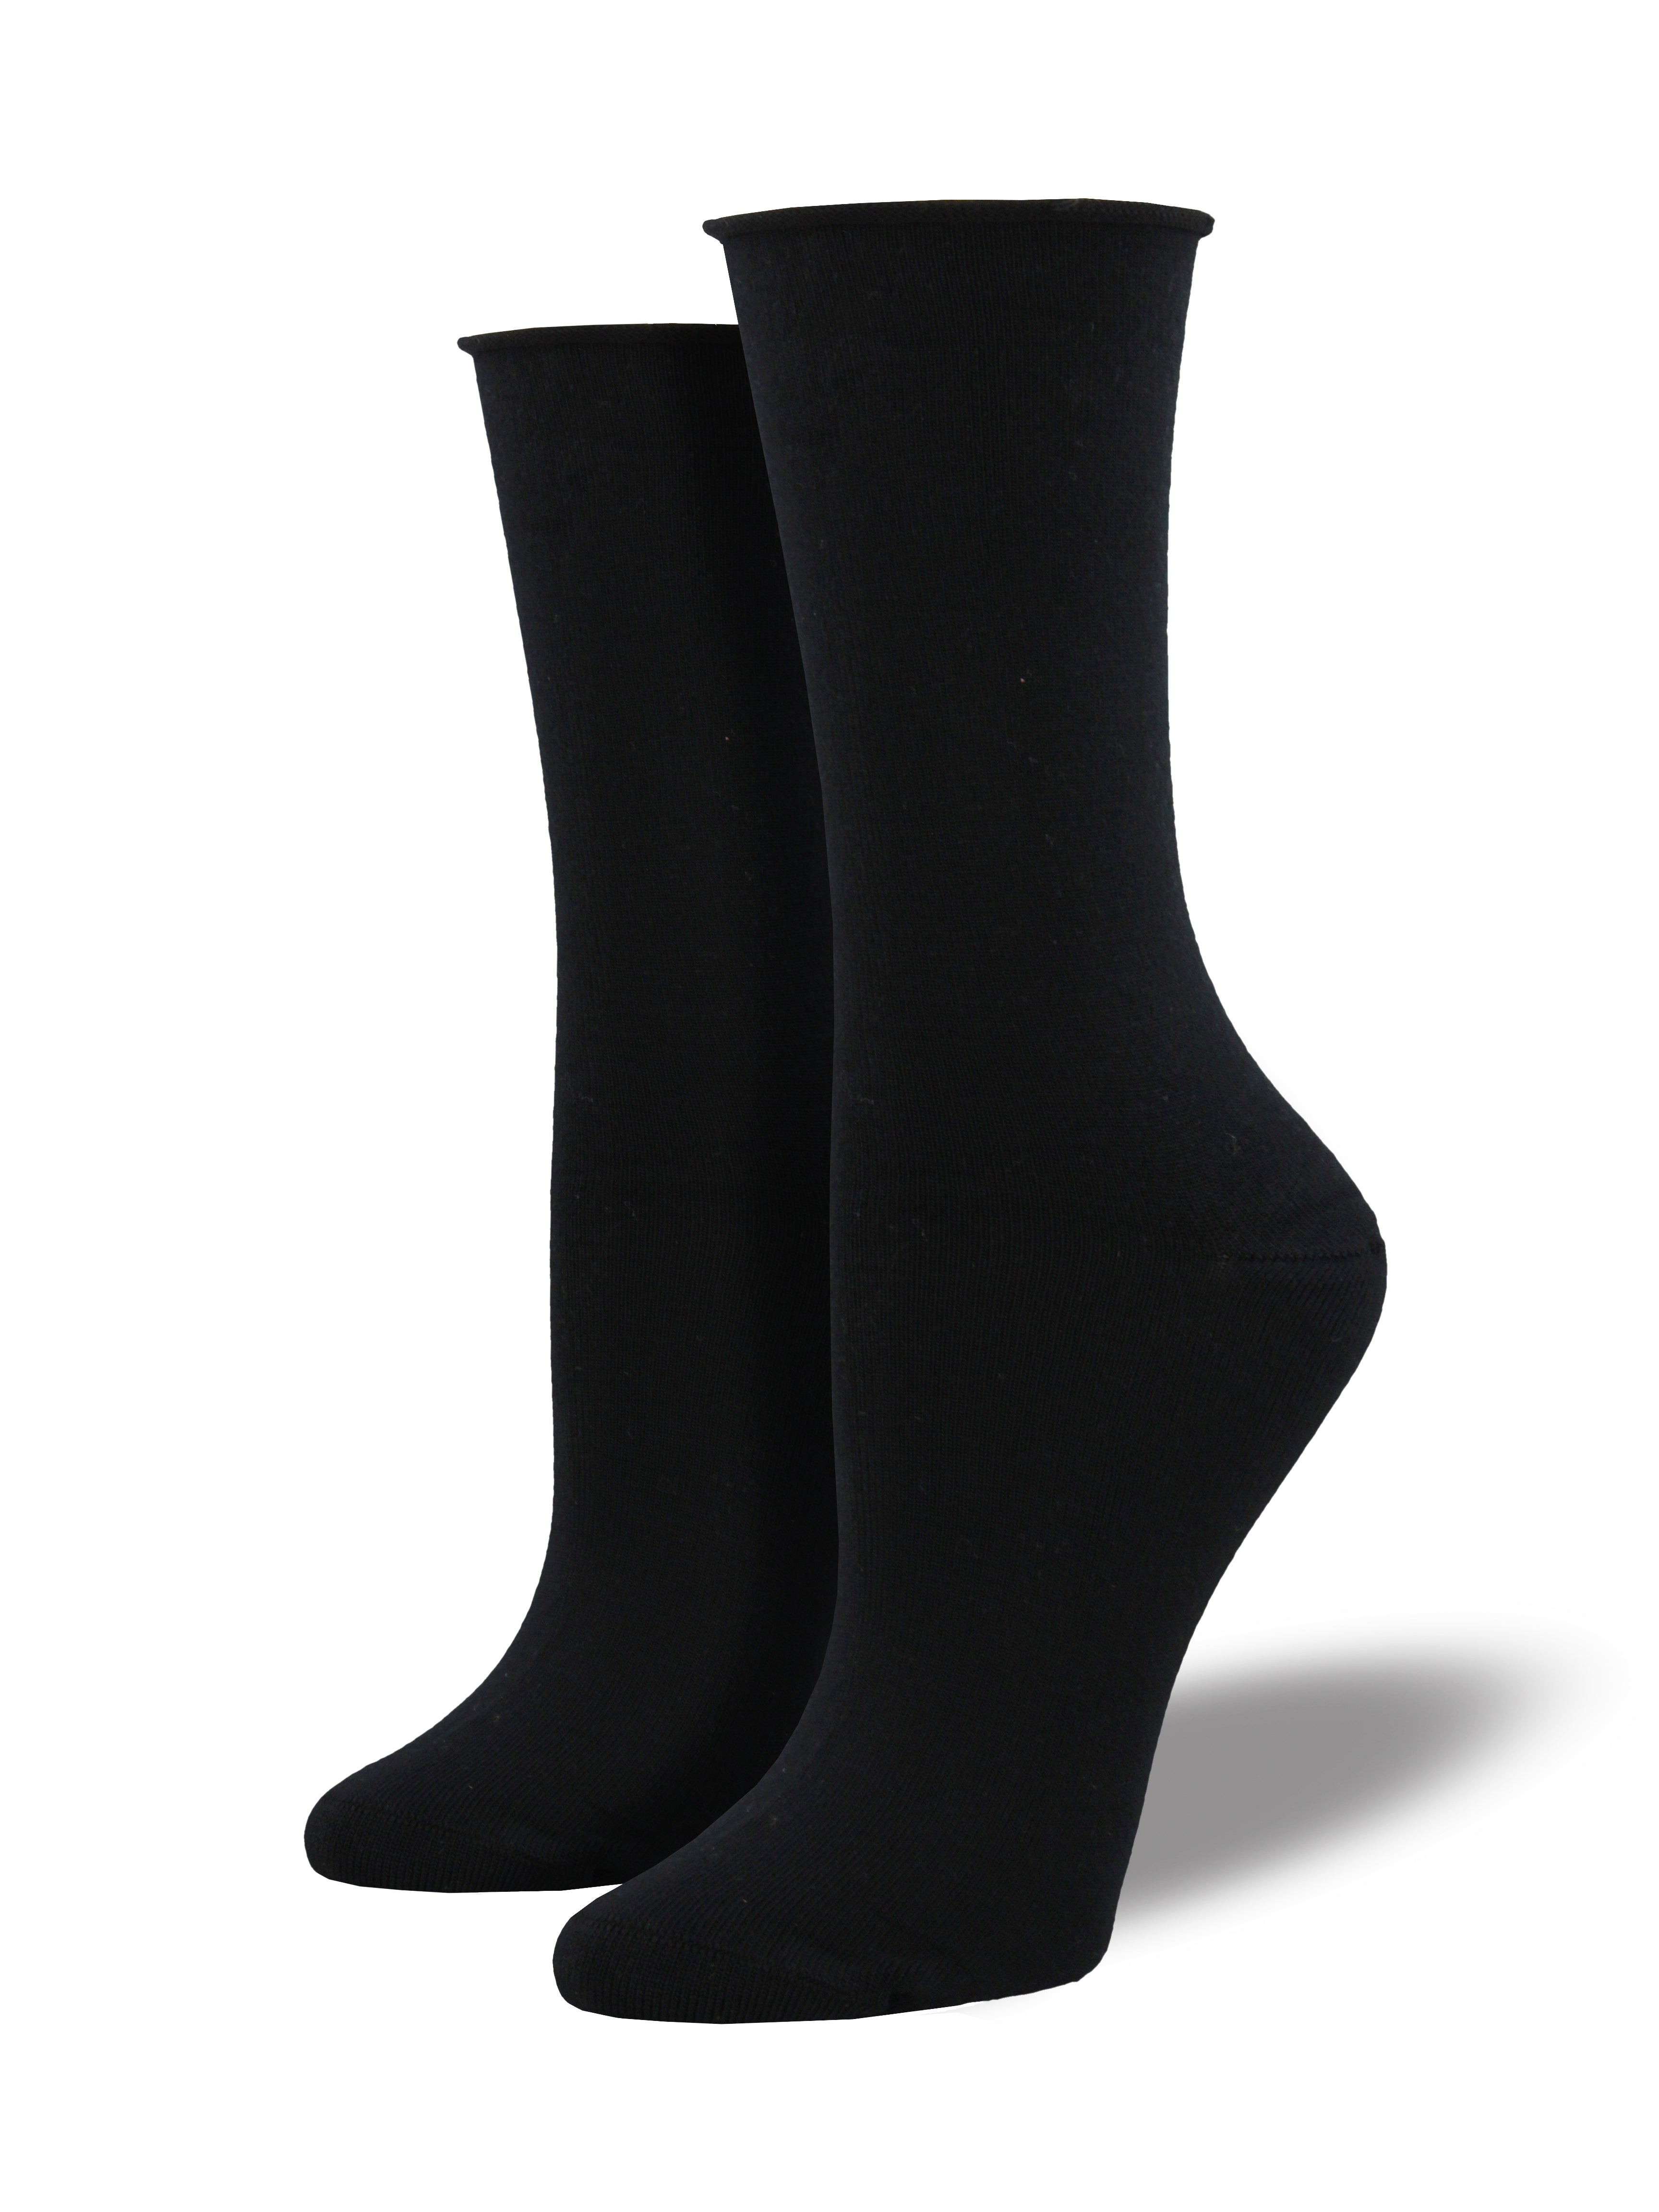 Women's Bamboo "Solid" Roll Top Socks